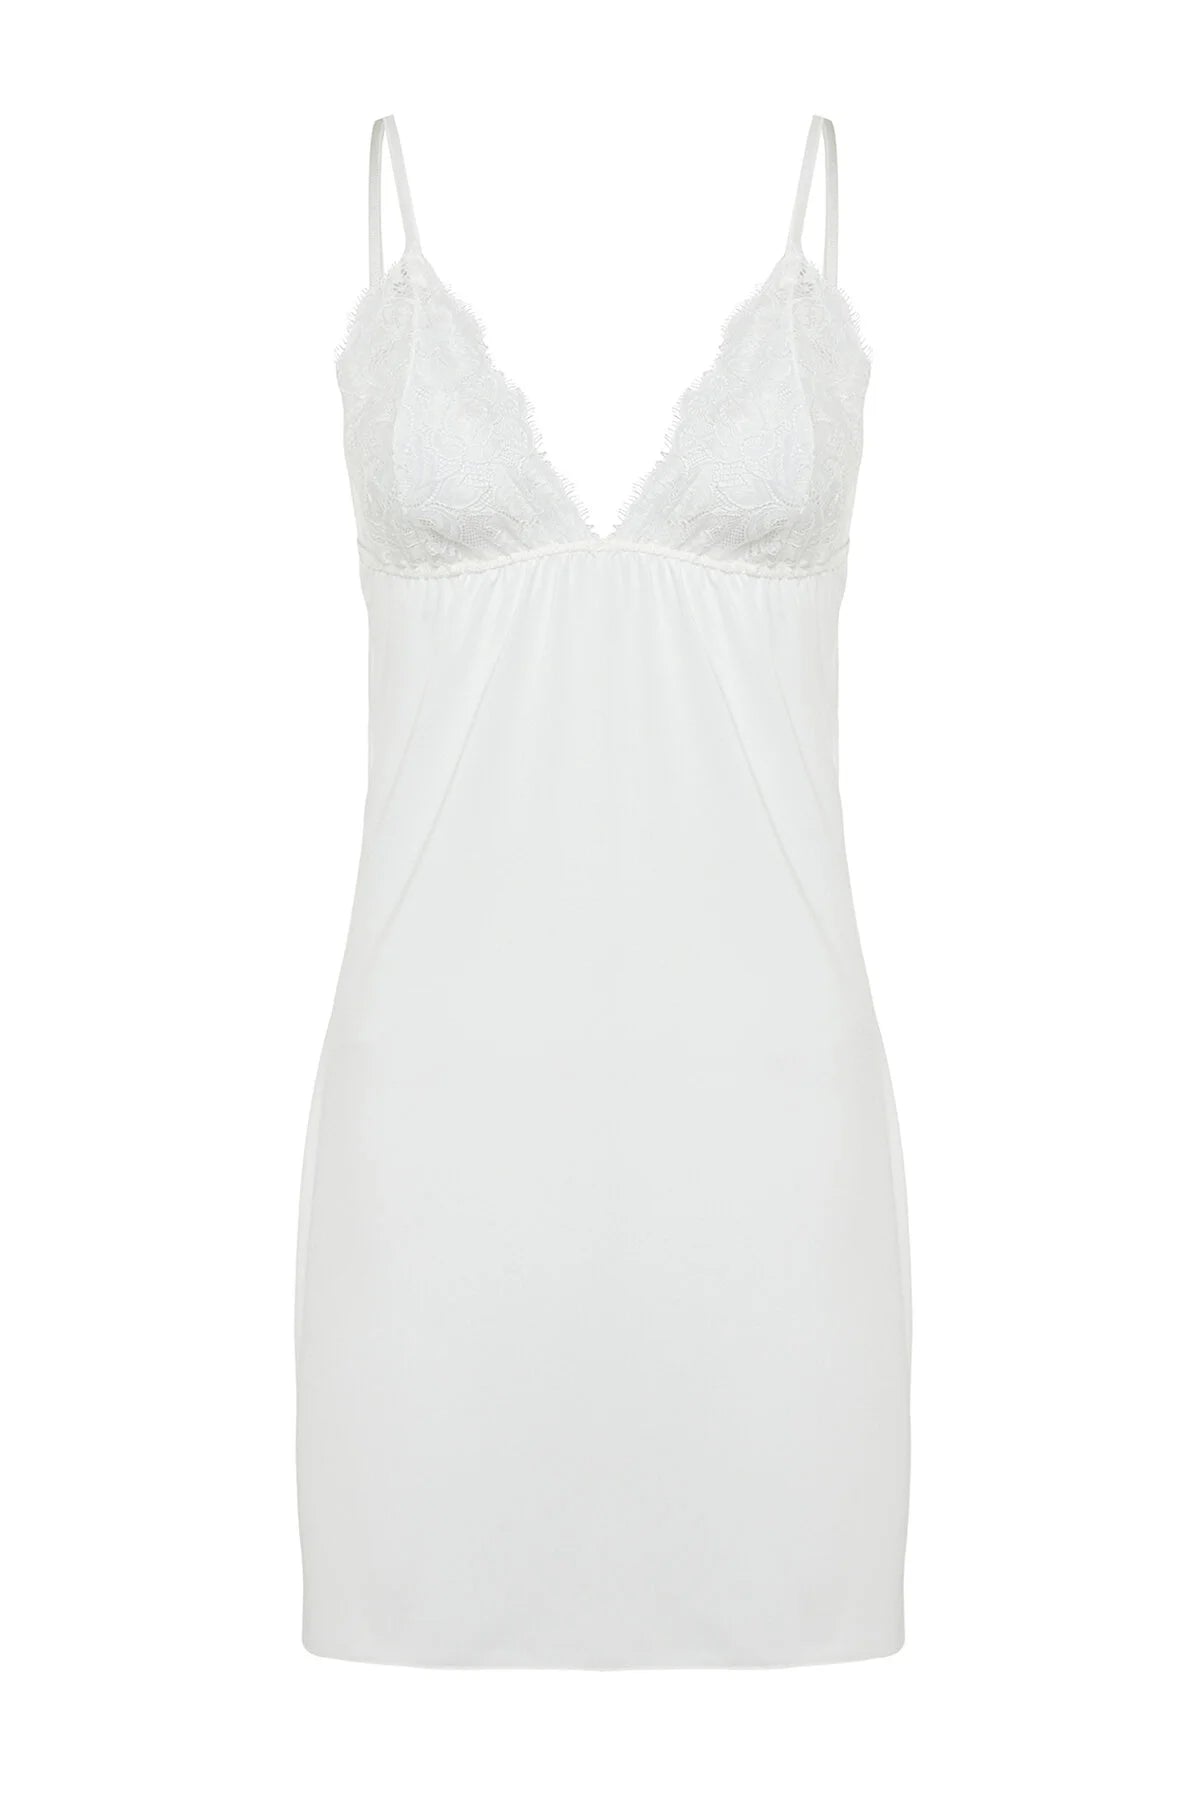 Knitted Babydoll with Window/Cut Out Detail - Lebbse